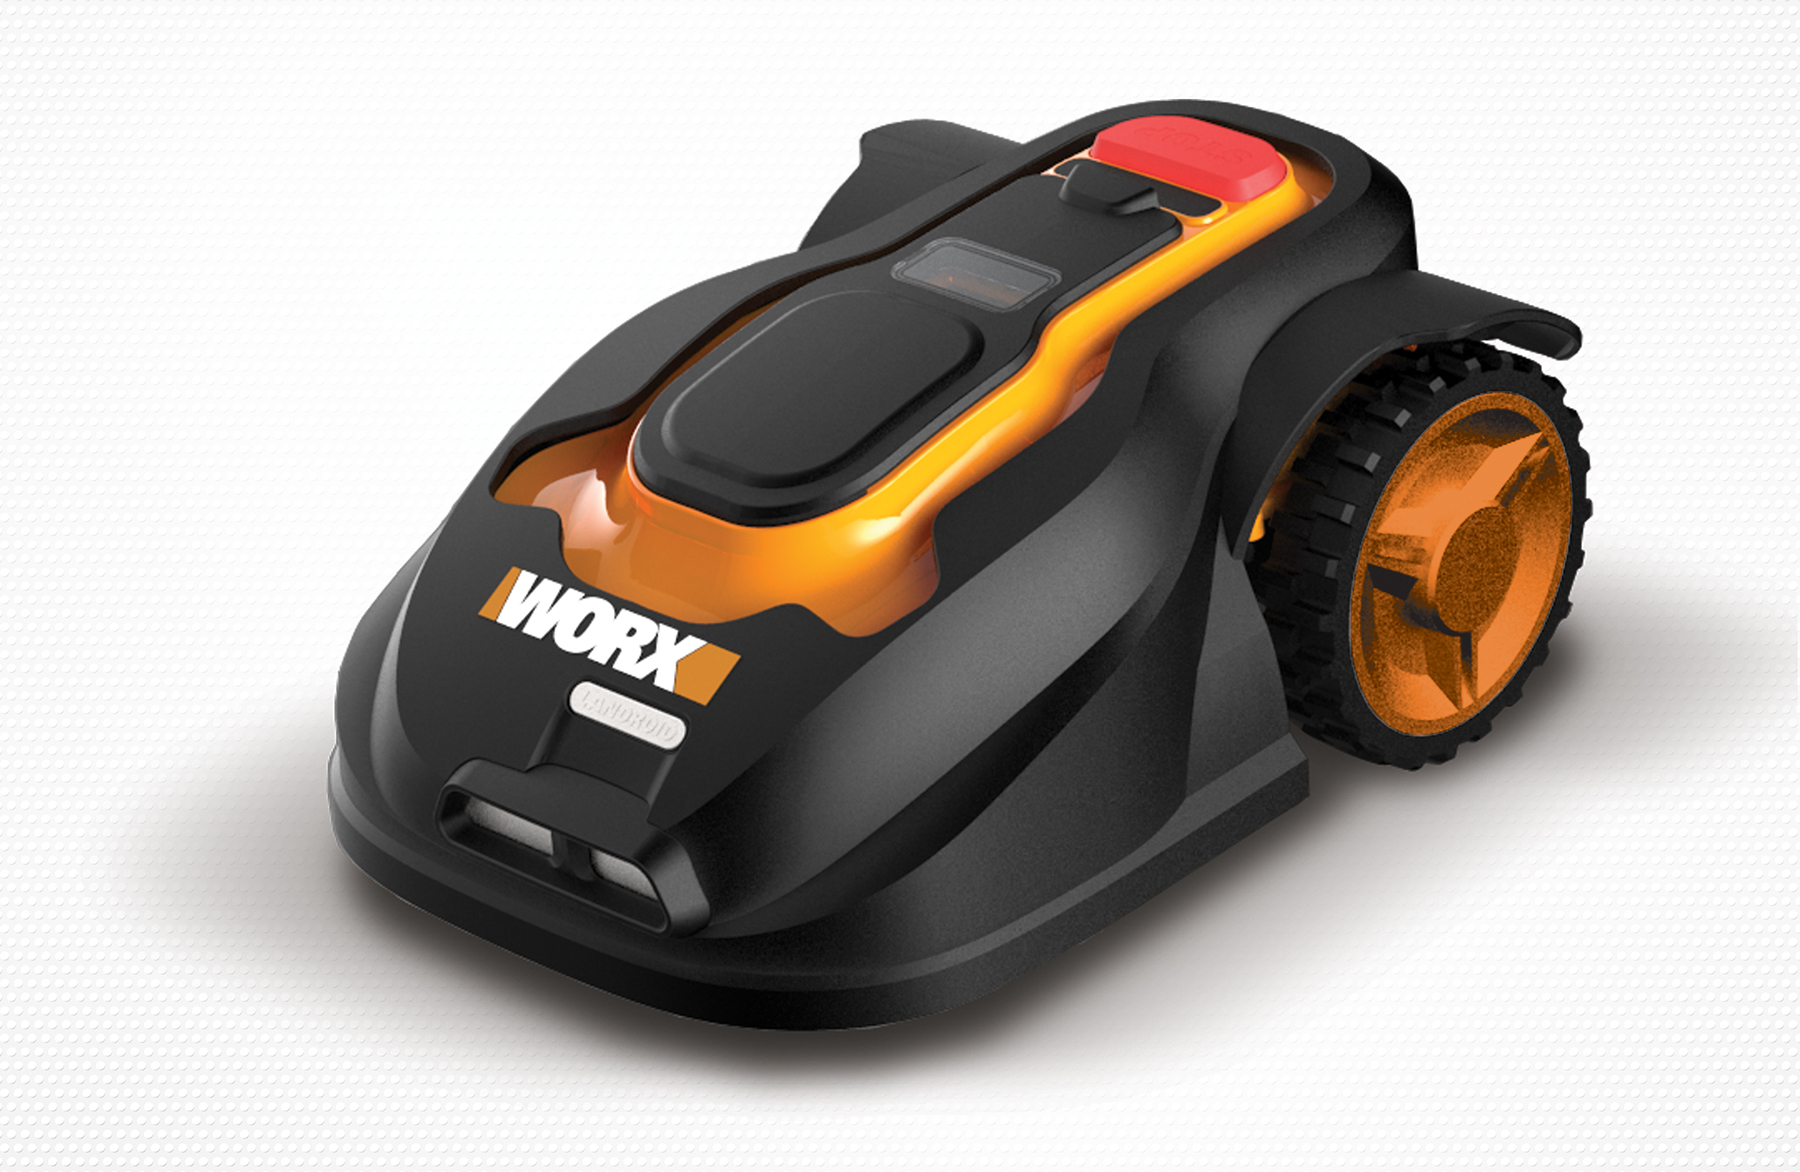 WORX Landroid is a fully automated mowing vehicle that requires minimal time and effort.